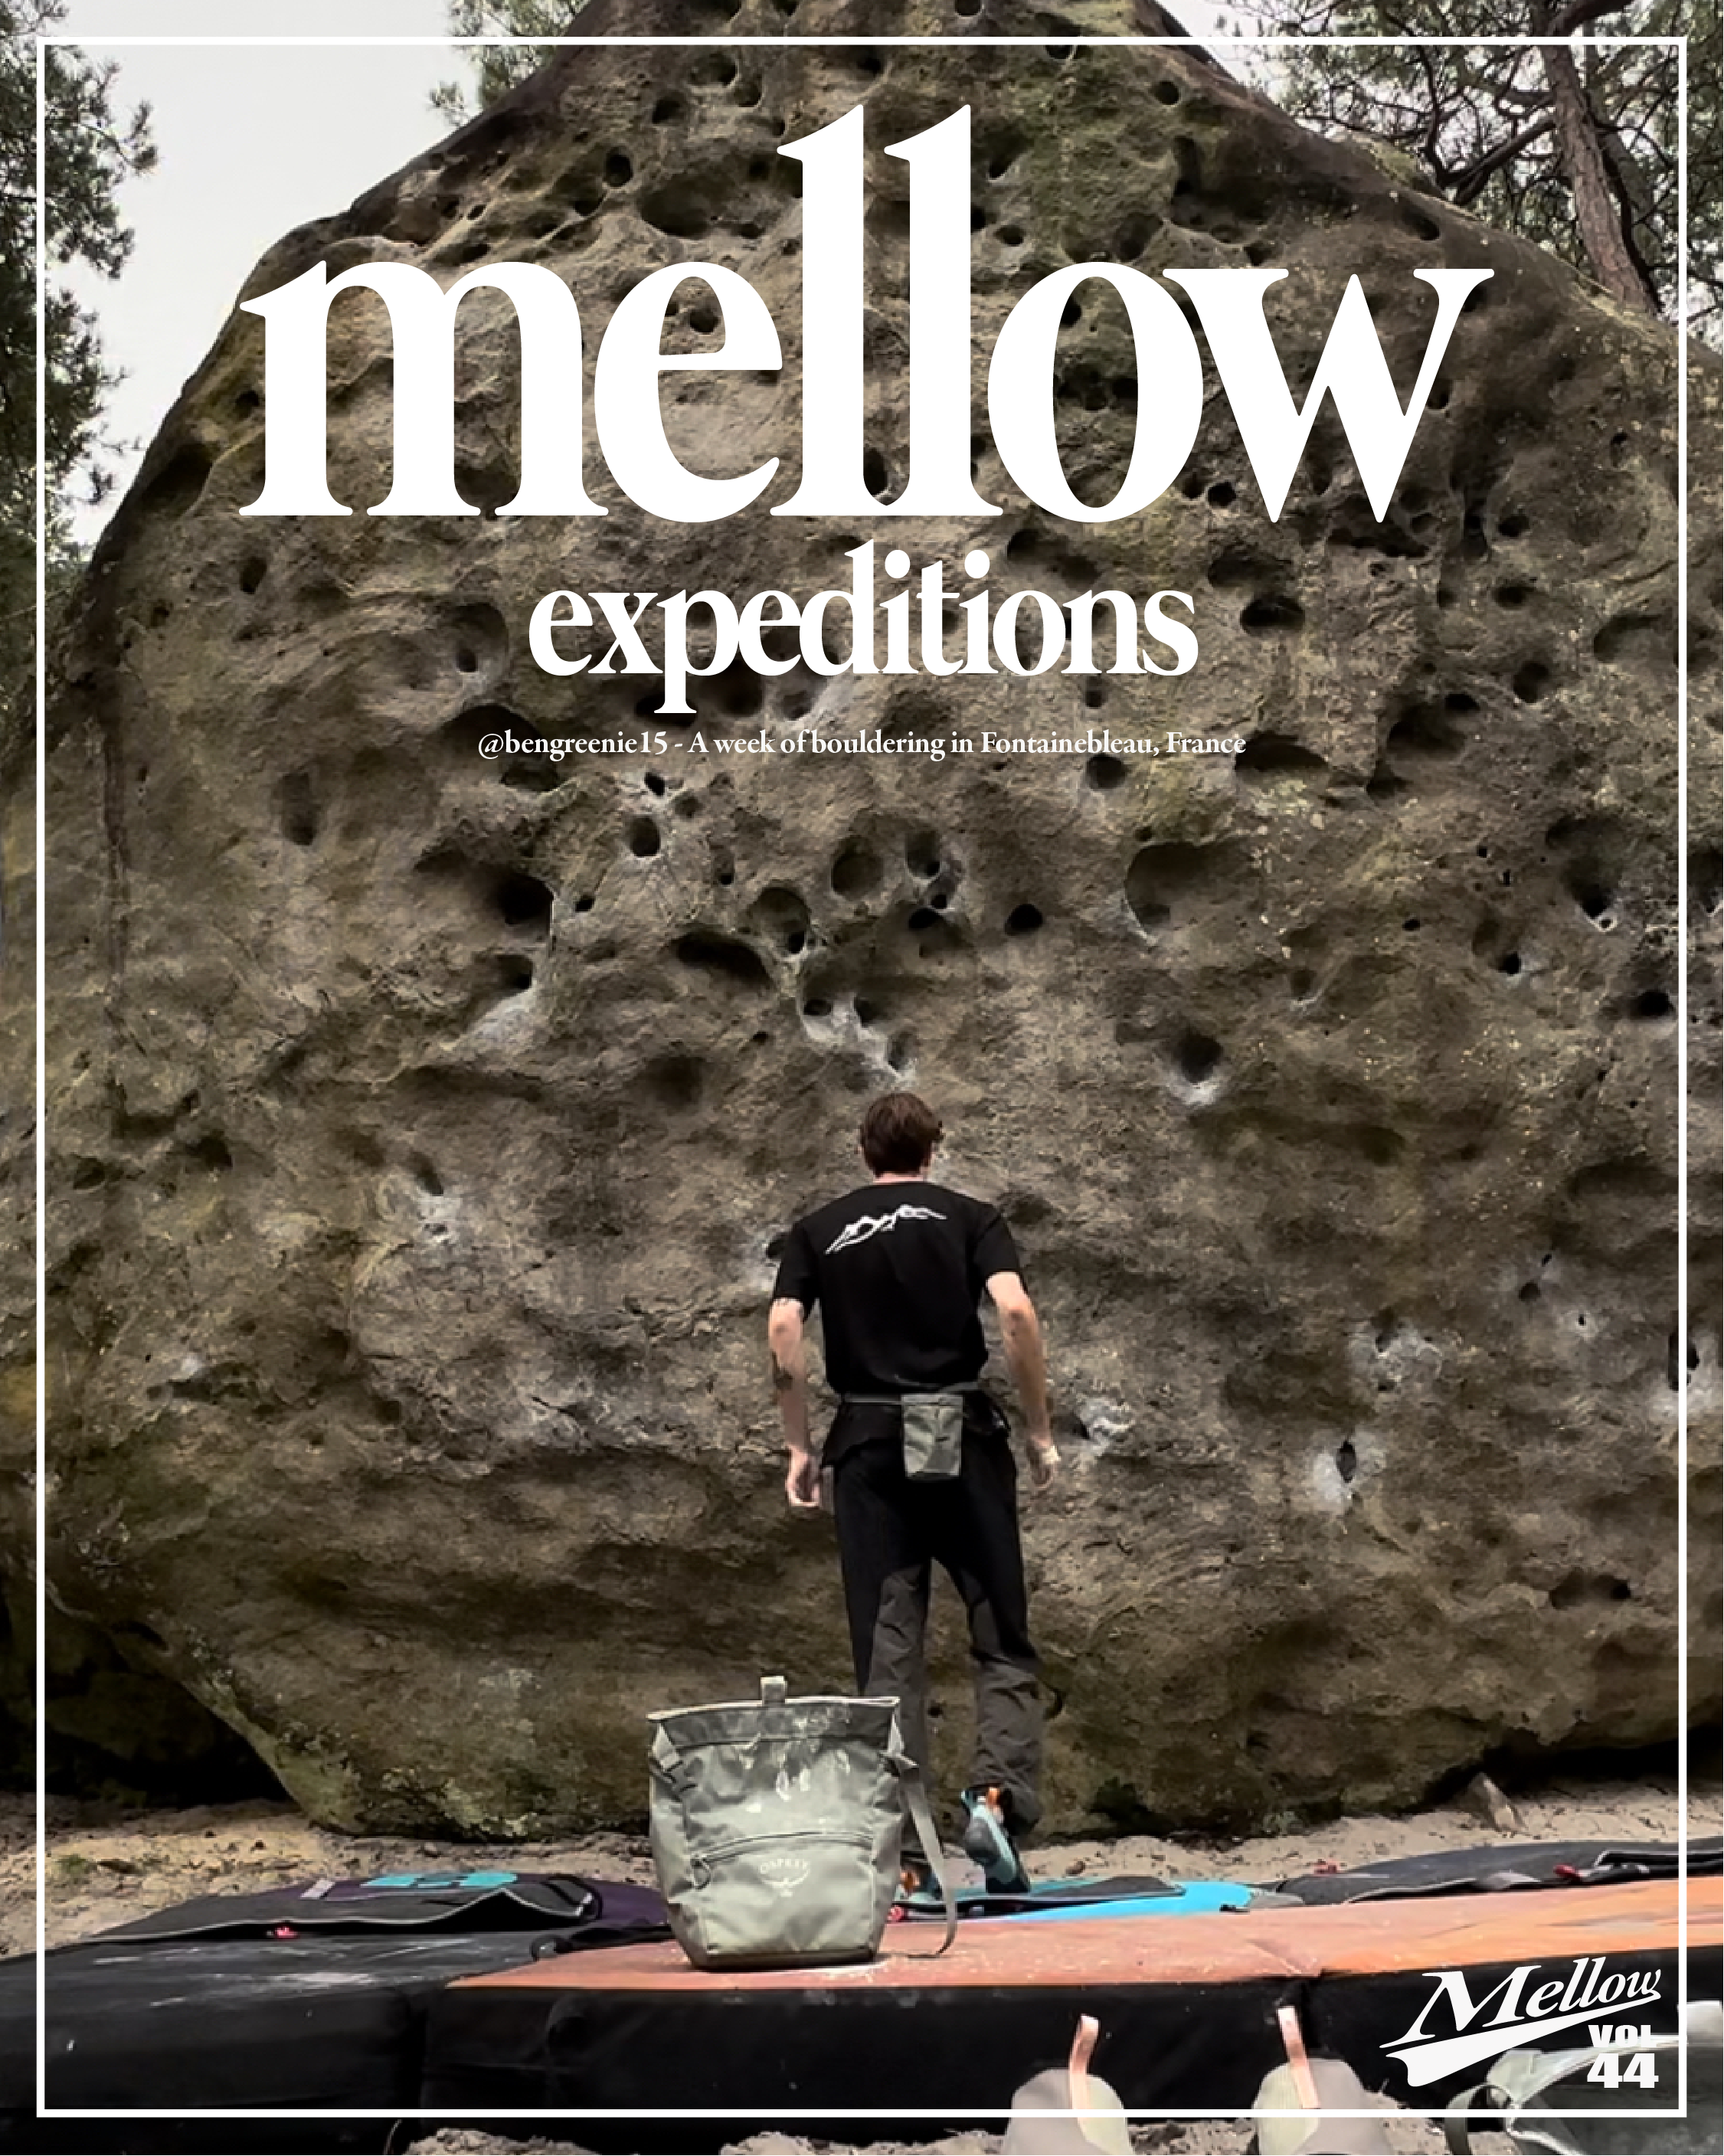 Mellow Expeditions - @bengreenie15